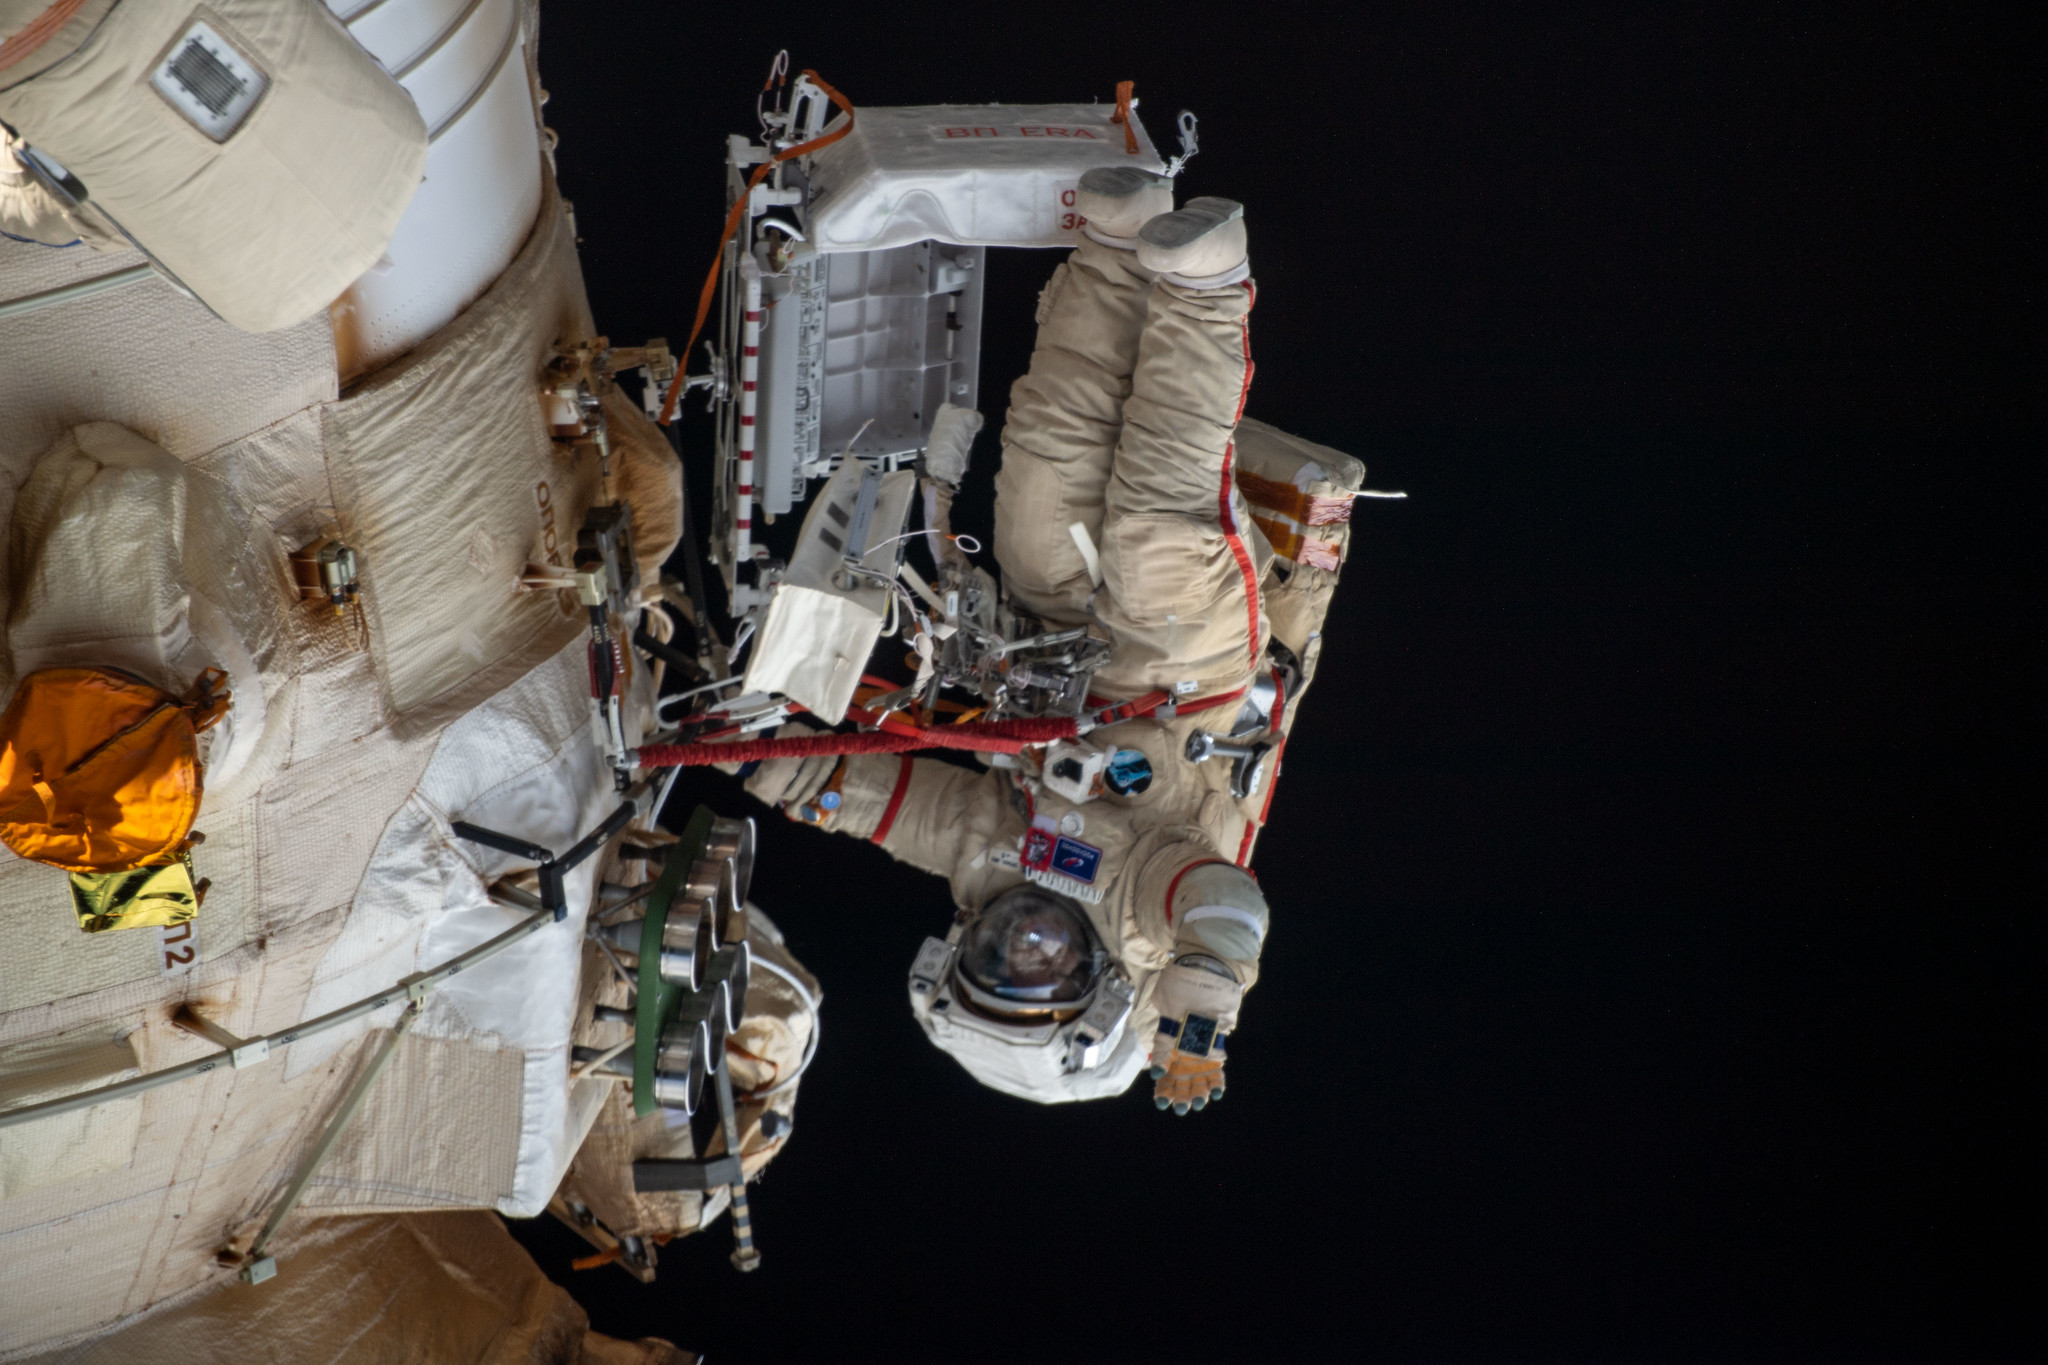 (April 18, 2022) --- Cosmonaut Oleg Artemyev waves to the camera while working outside the Nauka multipurpose laboratory module during a spacewalk that lasted for six hours and 37 minutes to outfit Nauka and configure the European robotic arm on the International Space Station's Russian segment.